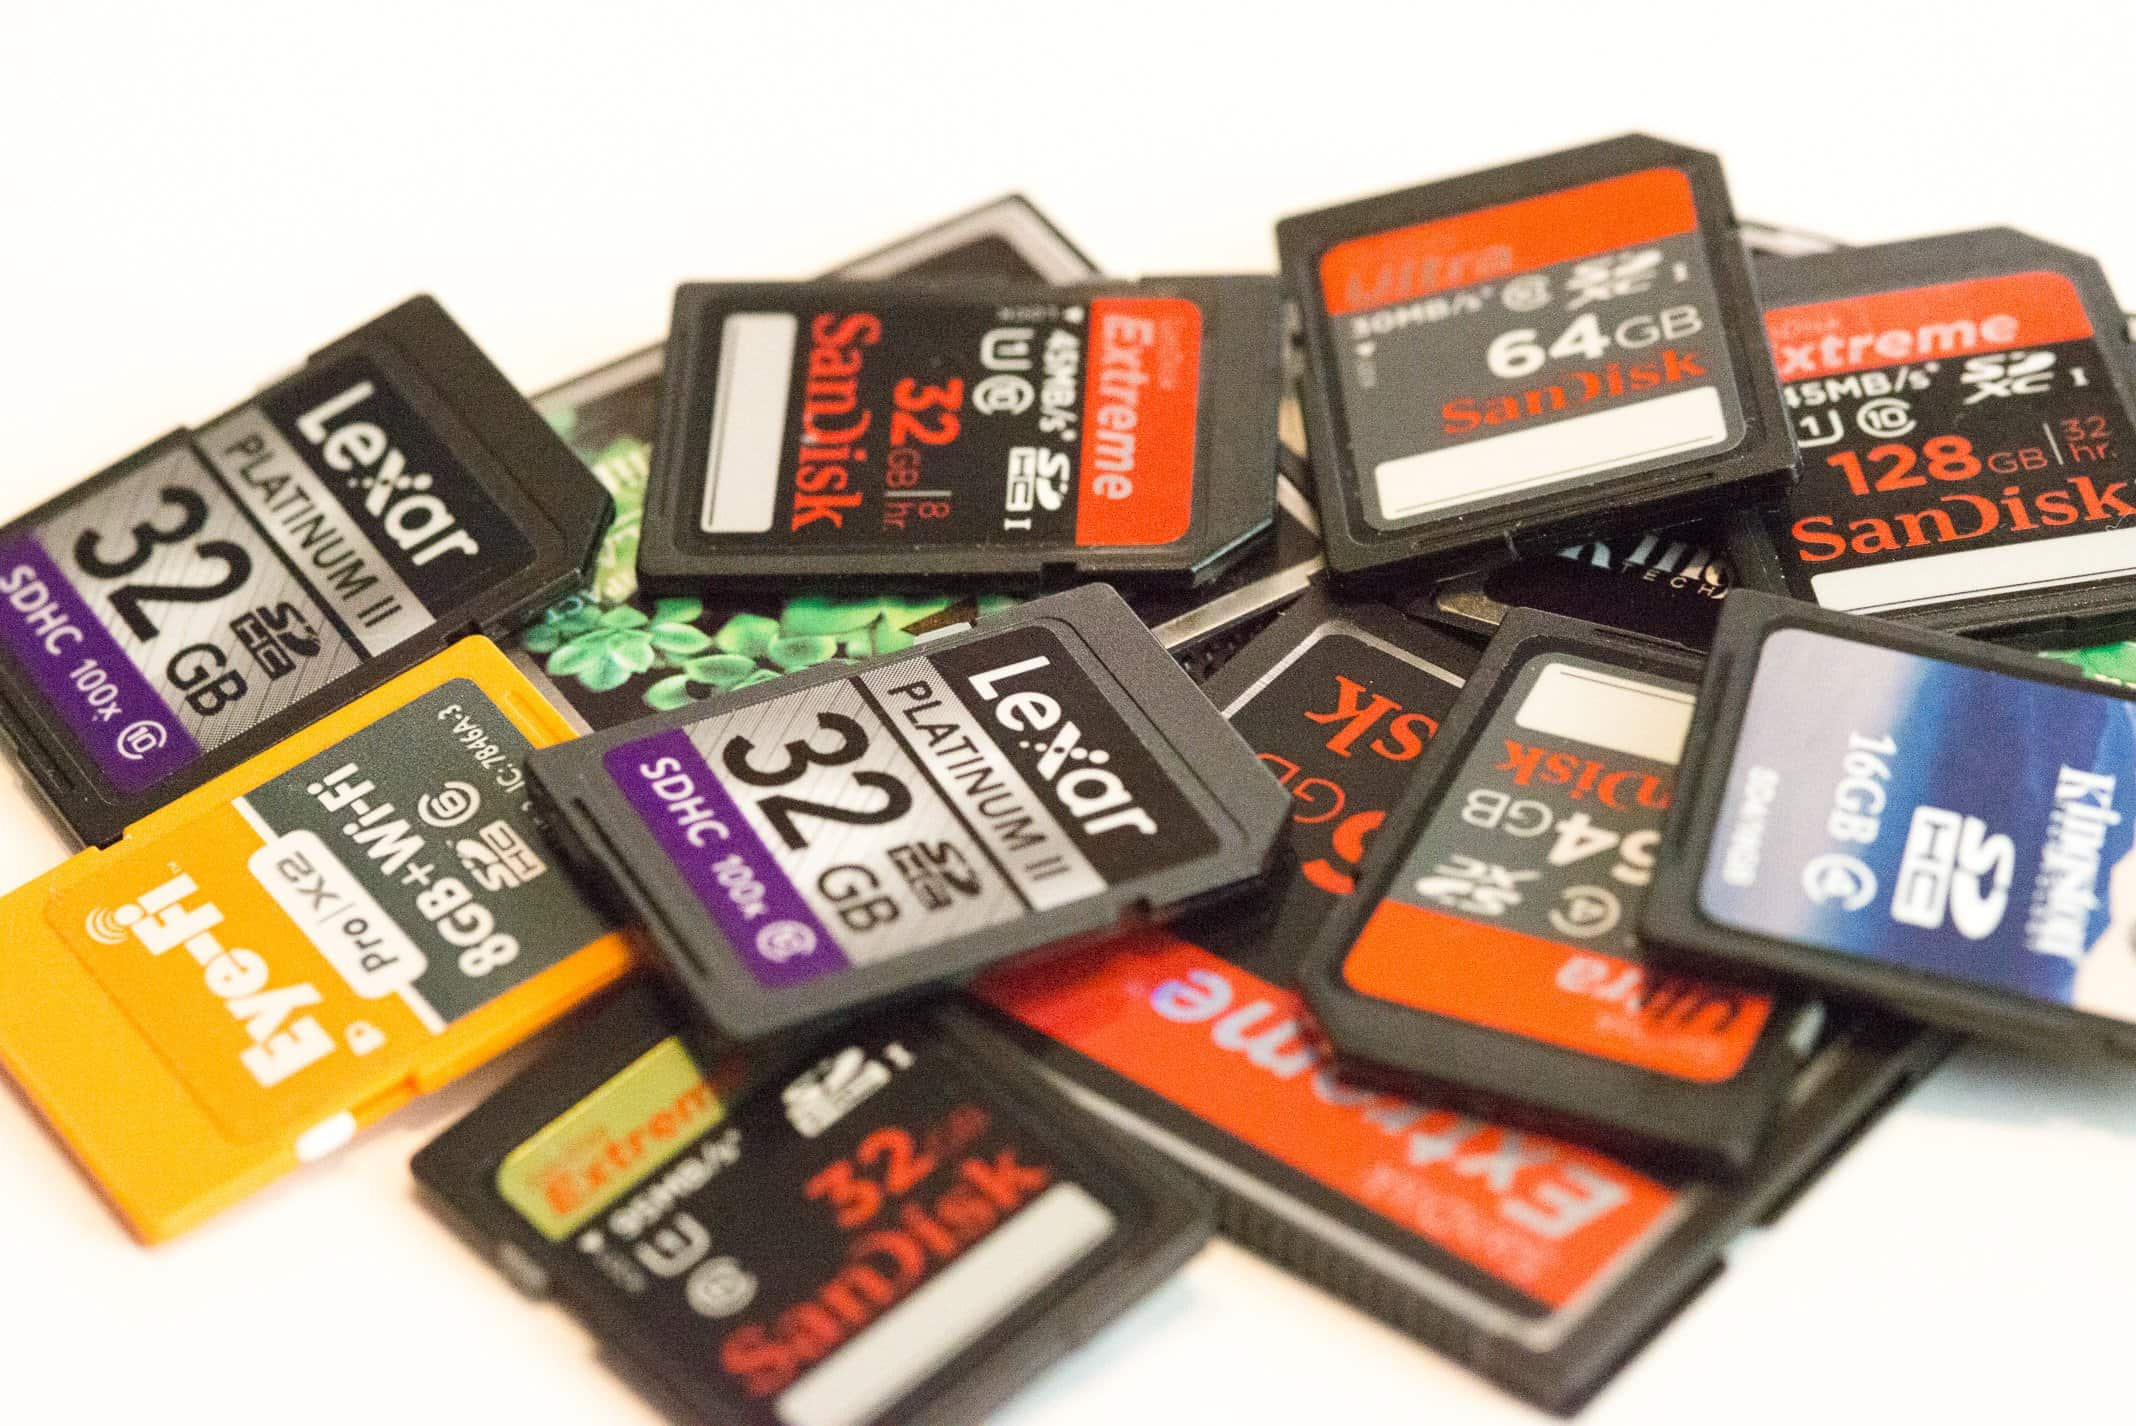 How To Recover Deleted Photos From Sd Card | November 2020